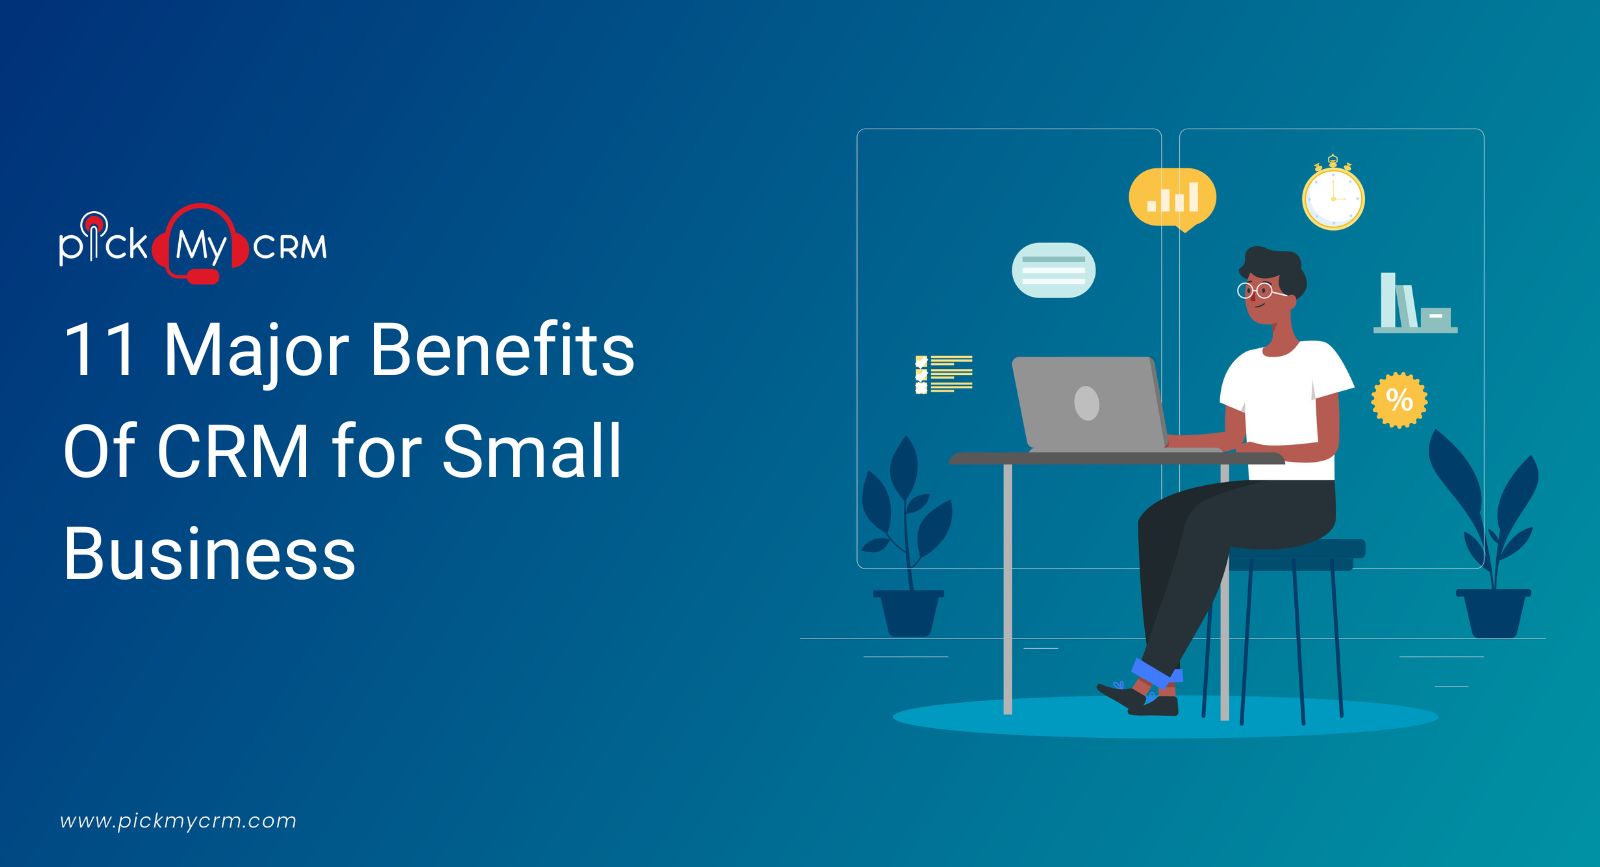 11 major benefits of CRM for small business